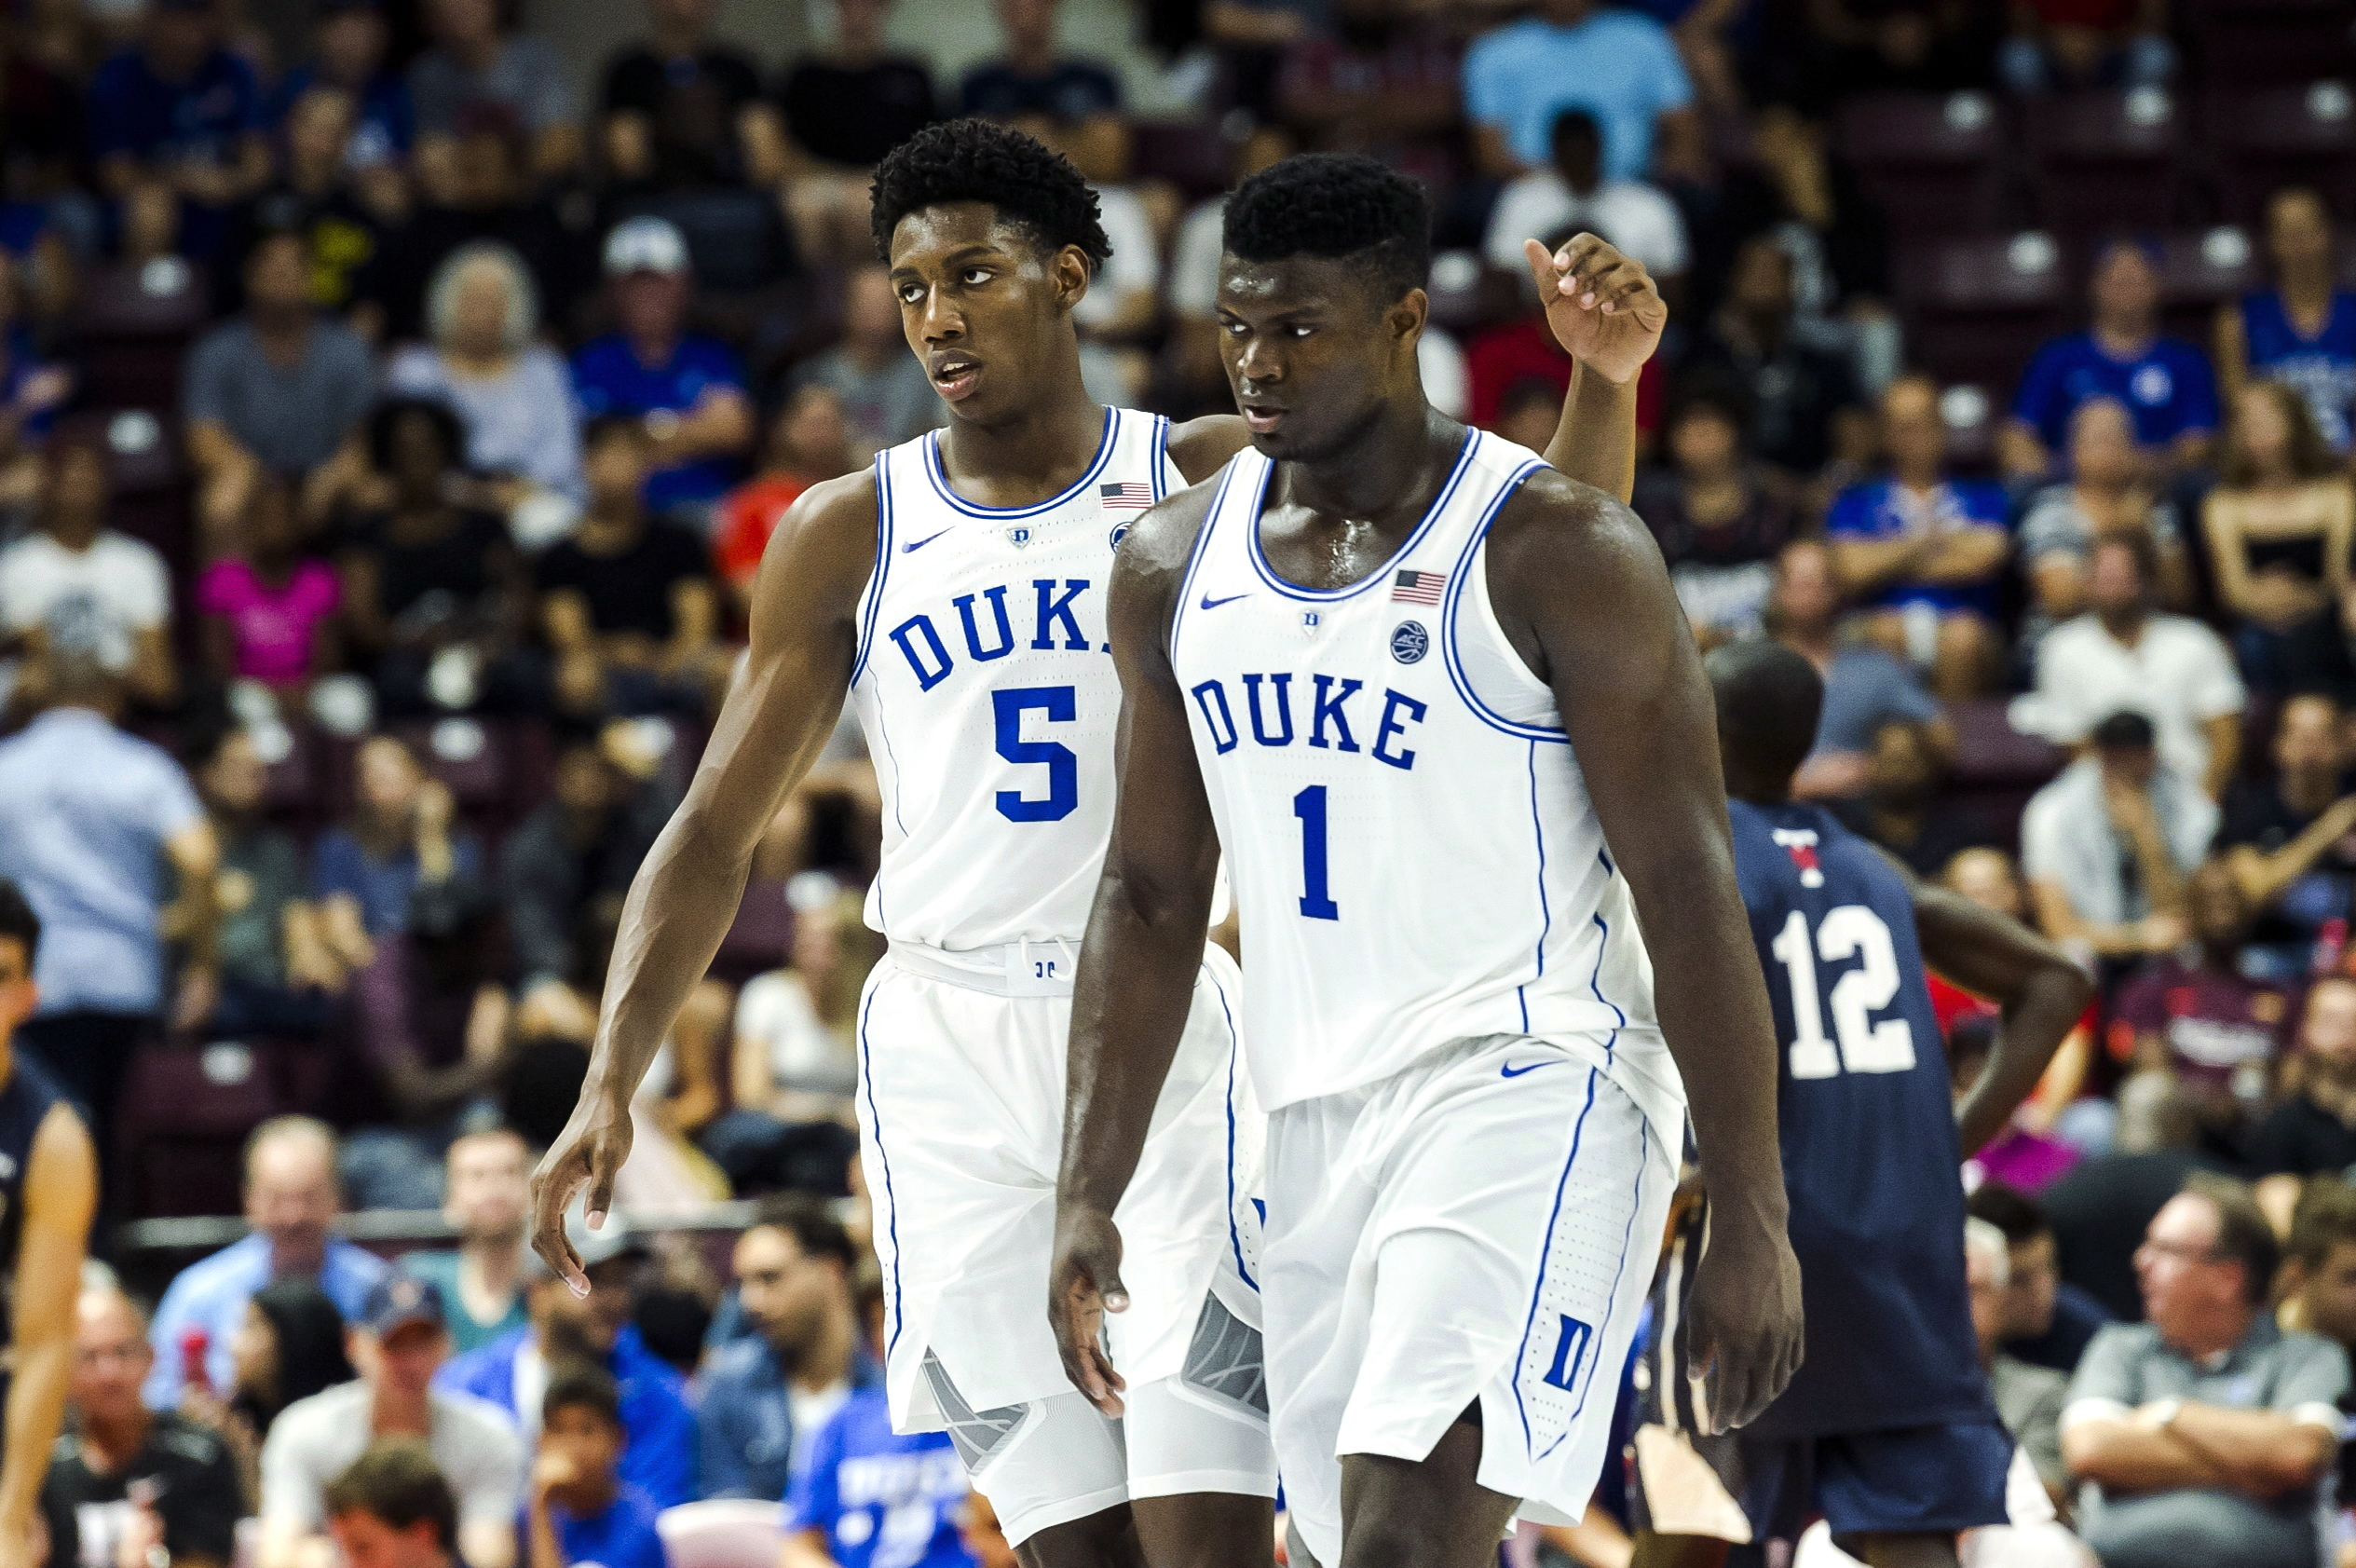 Duke freshmen look to bounce back after reality check